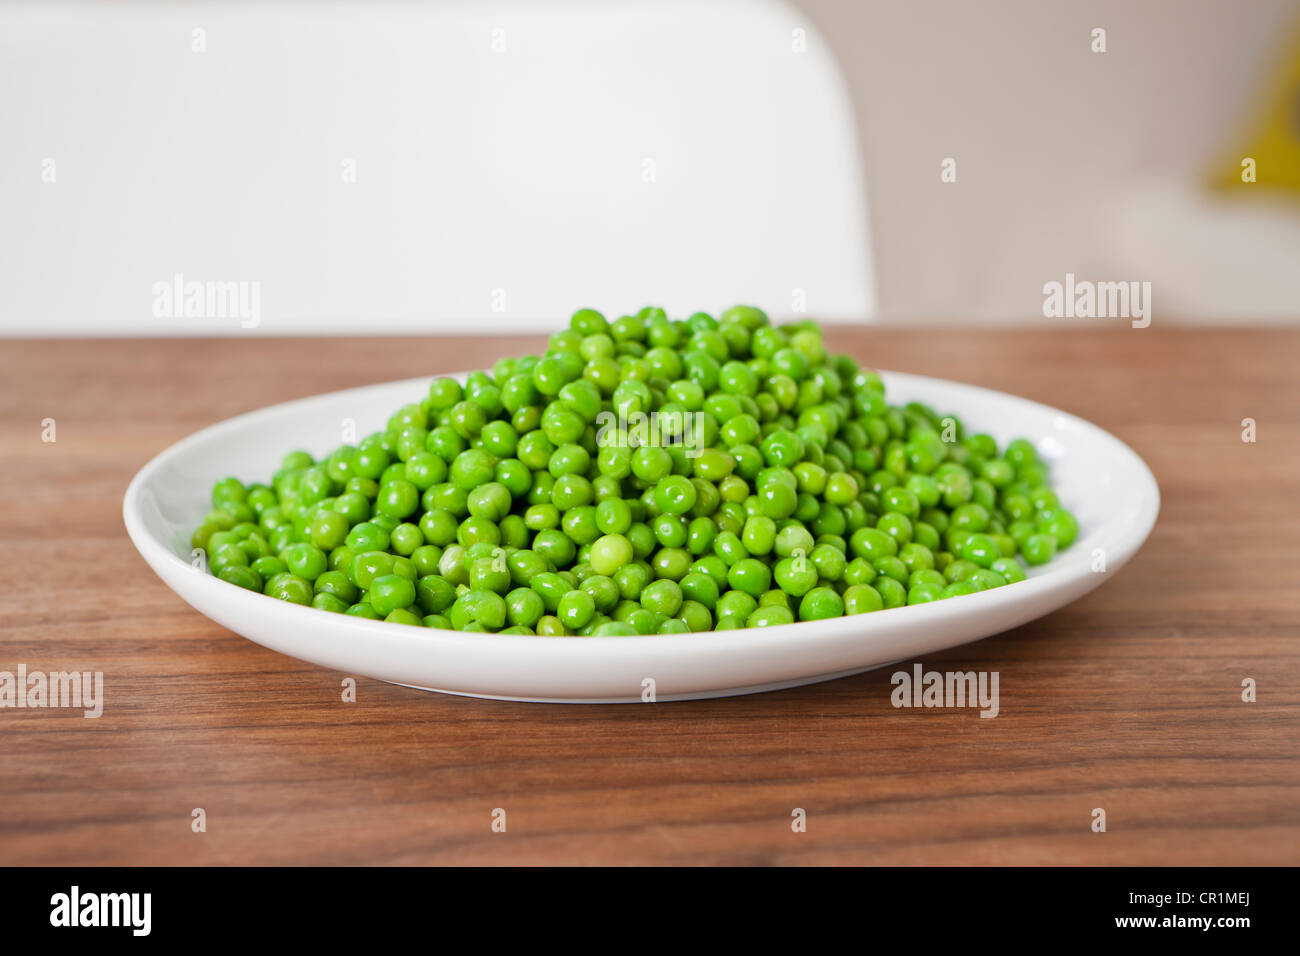 Close up of plate of peas on table Stock Photo